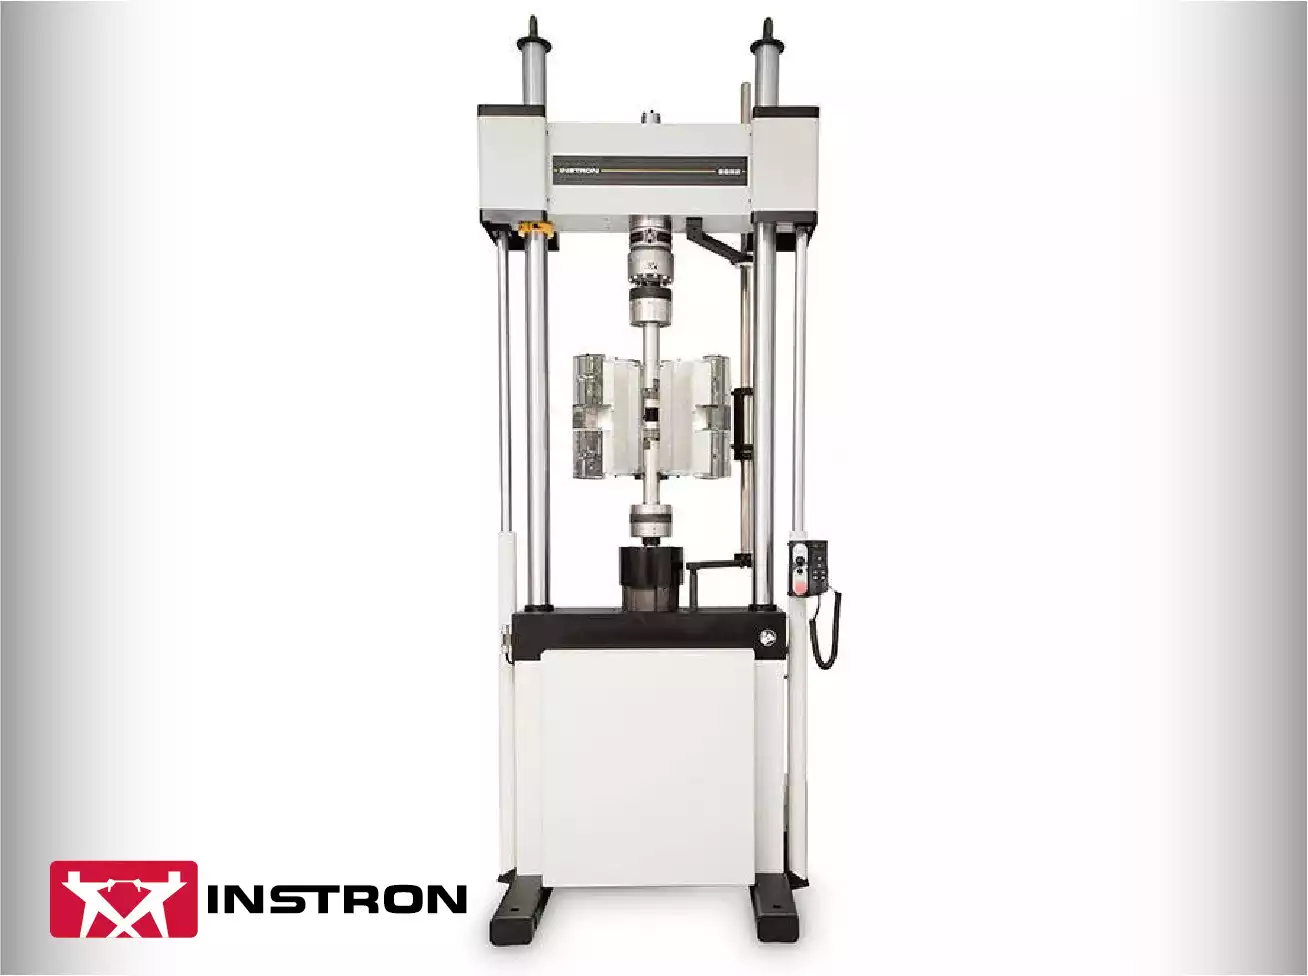 Instron Low Strain Rate 8862 Servo-Electric Systems